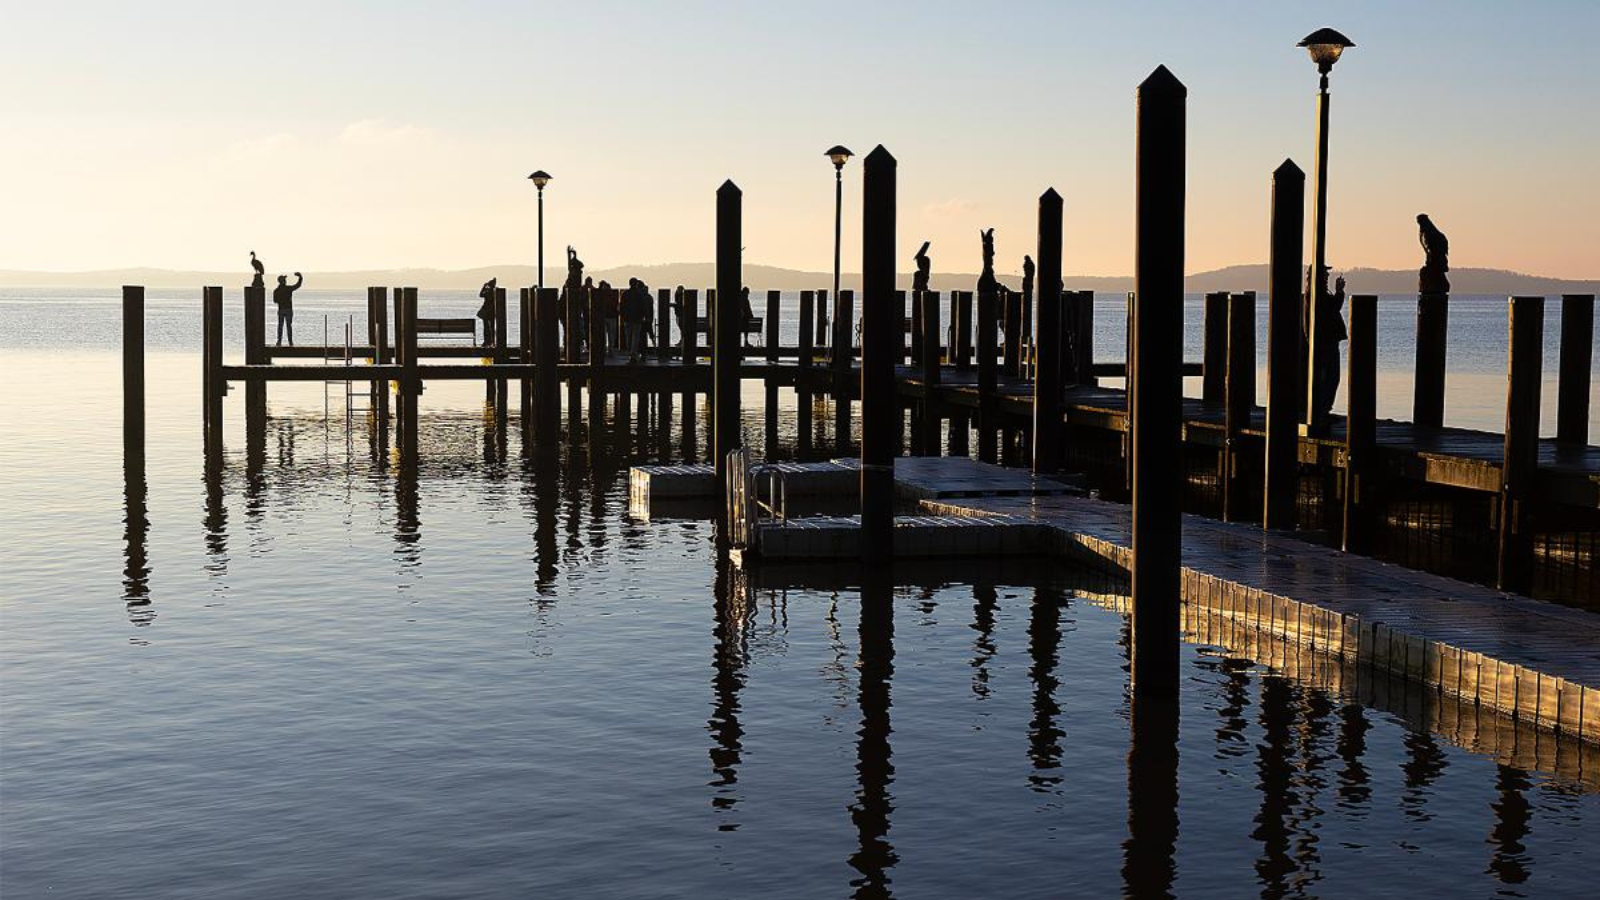 Could the Mississippi River benefit from Chesapeake Bay’s strategy to improve water quality?